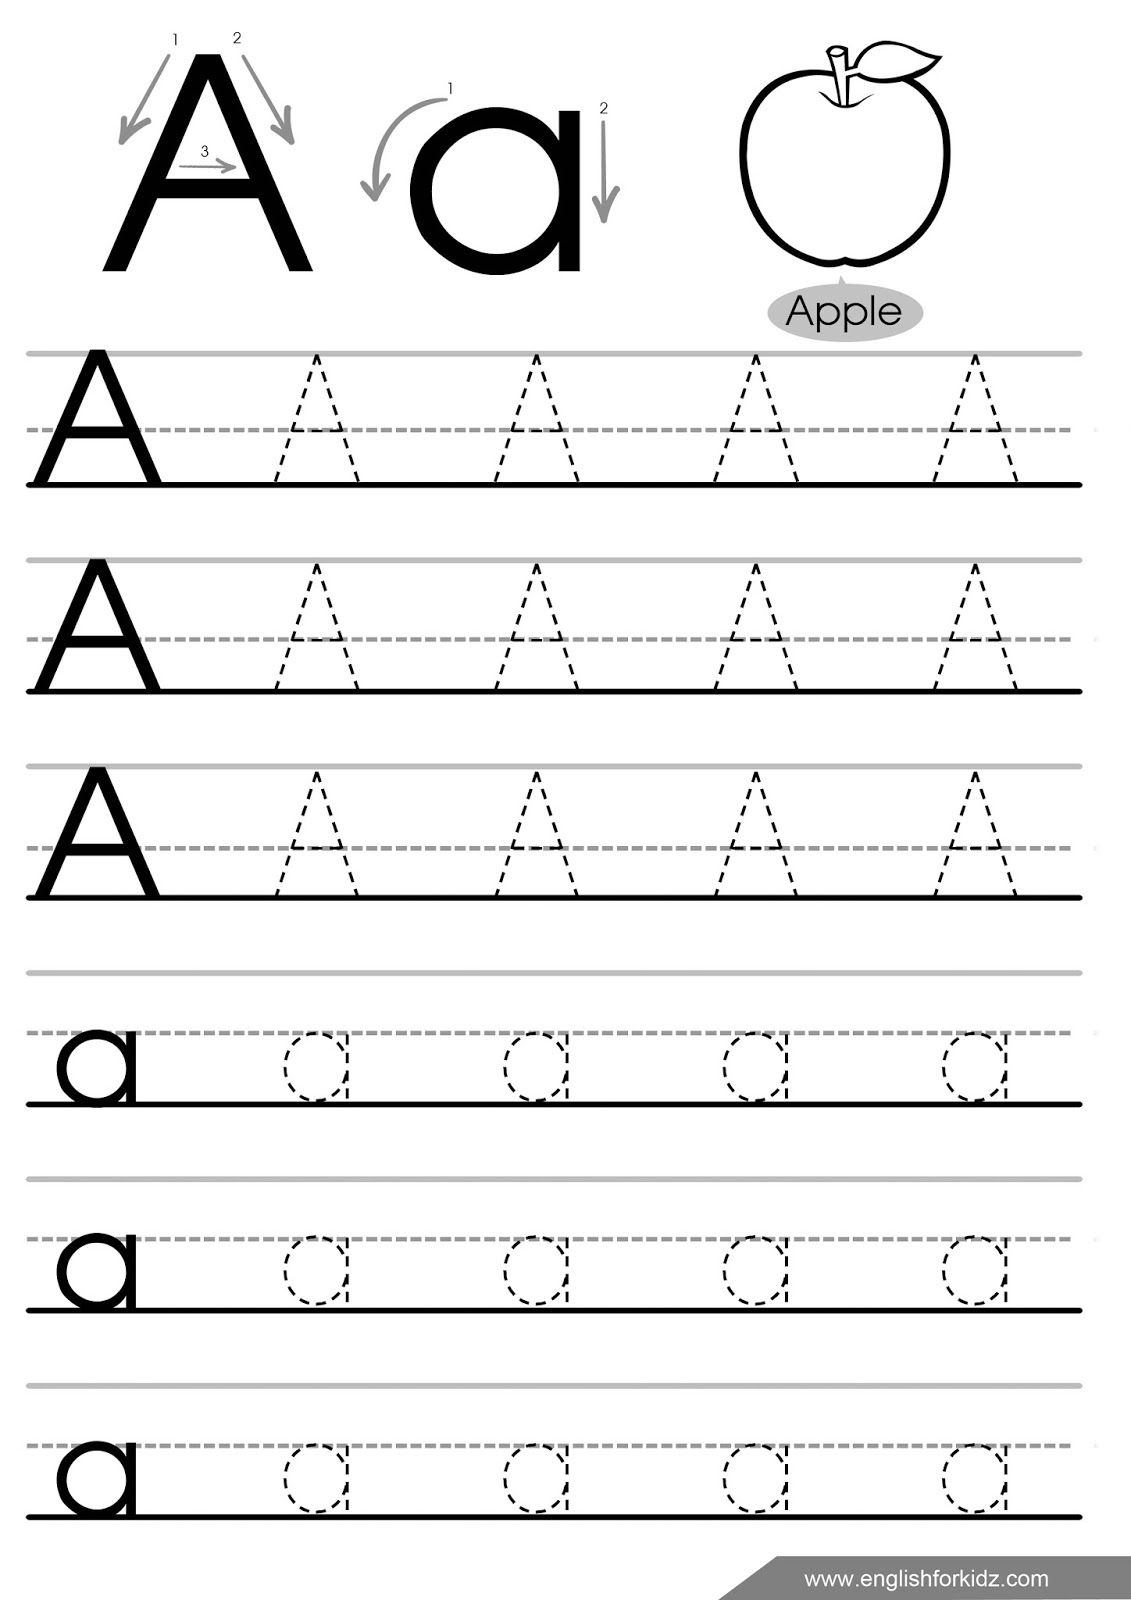 Pin On Letter Tracing Worksheets inside Alphabet Tracing Pages Pdf